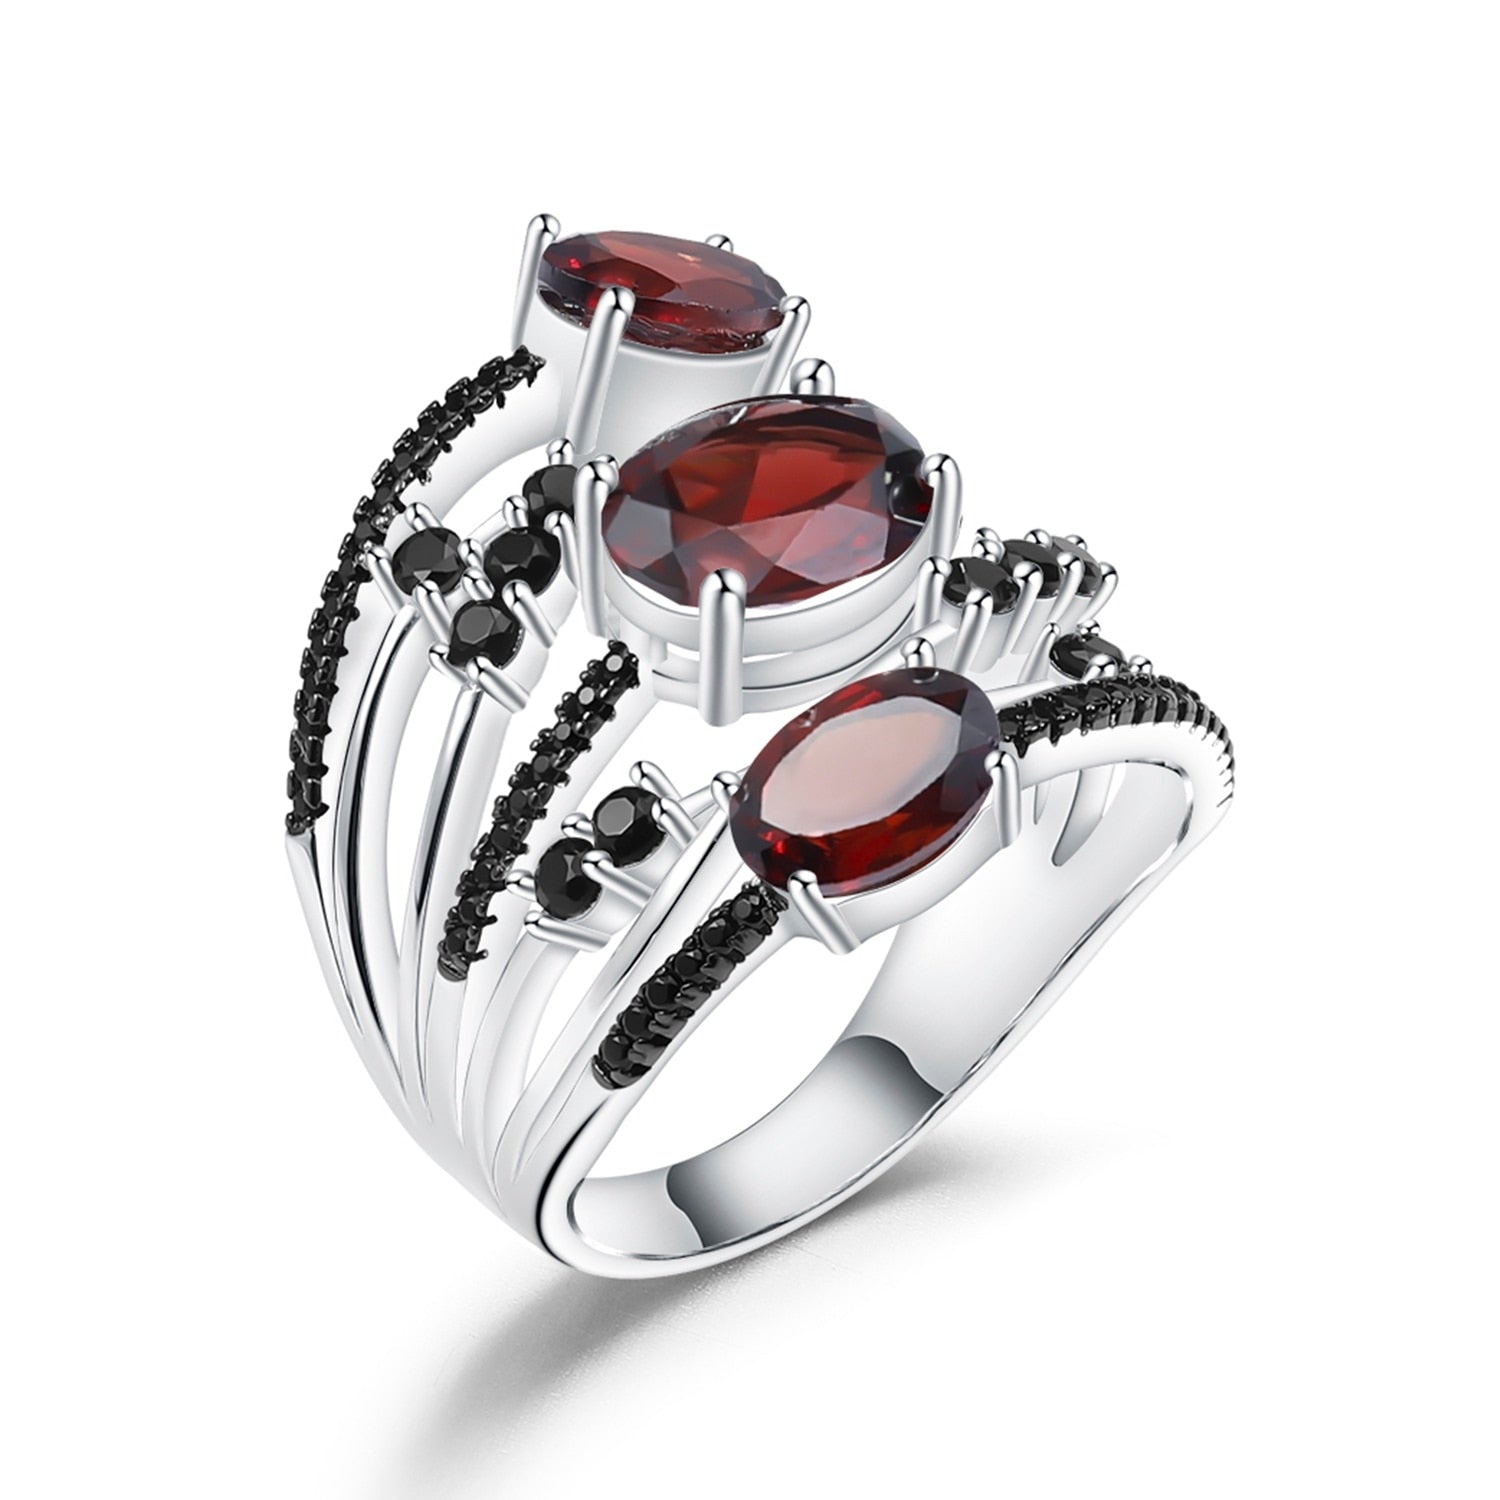 GEM&#39;S BALLET 925 Sterling Silver Stackable Anniversary Ring 4.0Ct Natural Red Garnet Birthstone Rings For Women Fine Jewelry Garnet|925 Sterling Silver